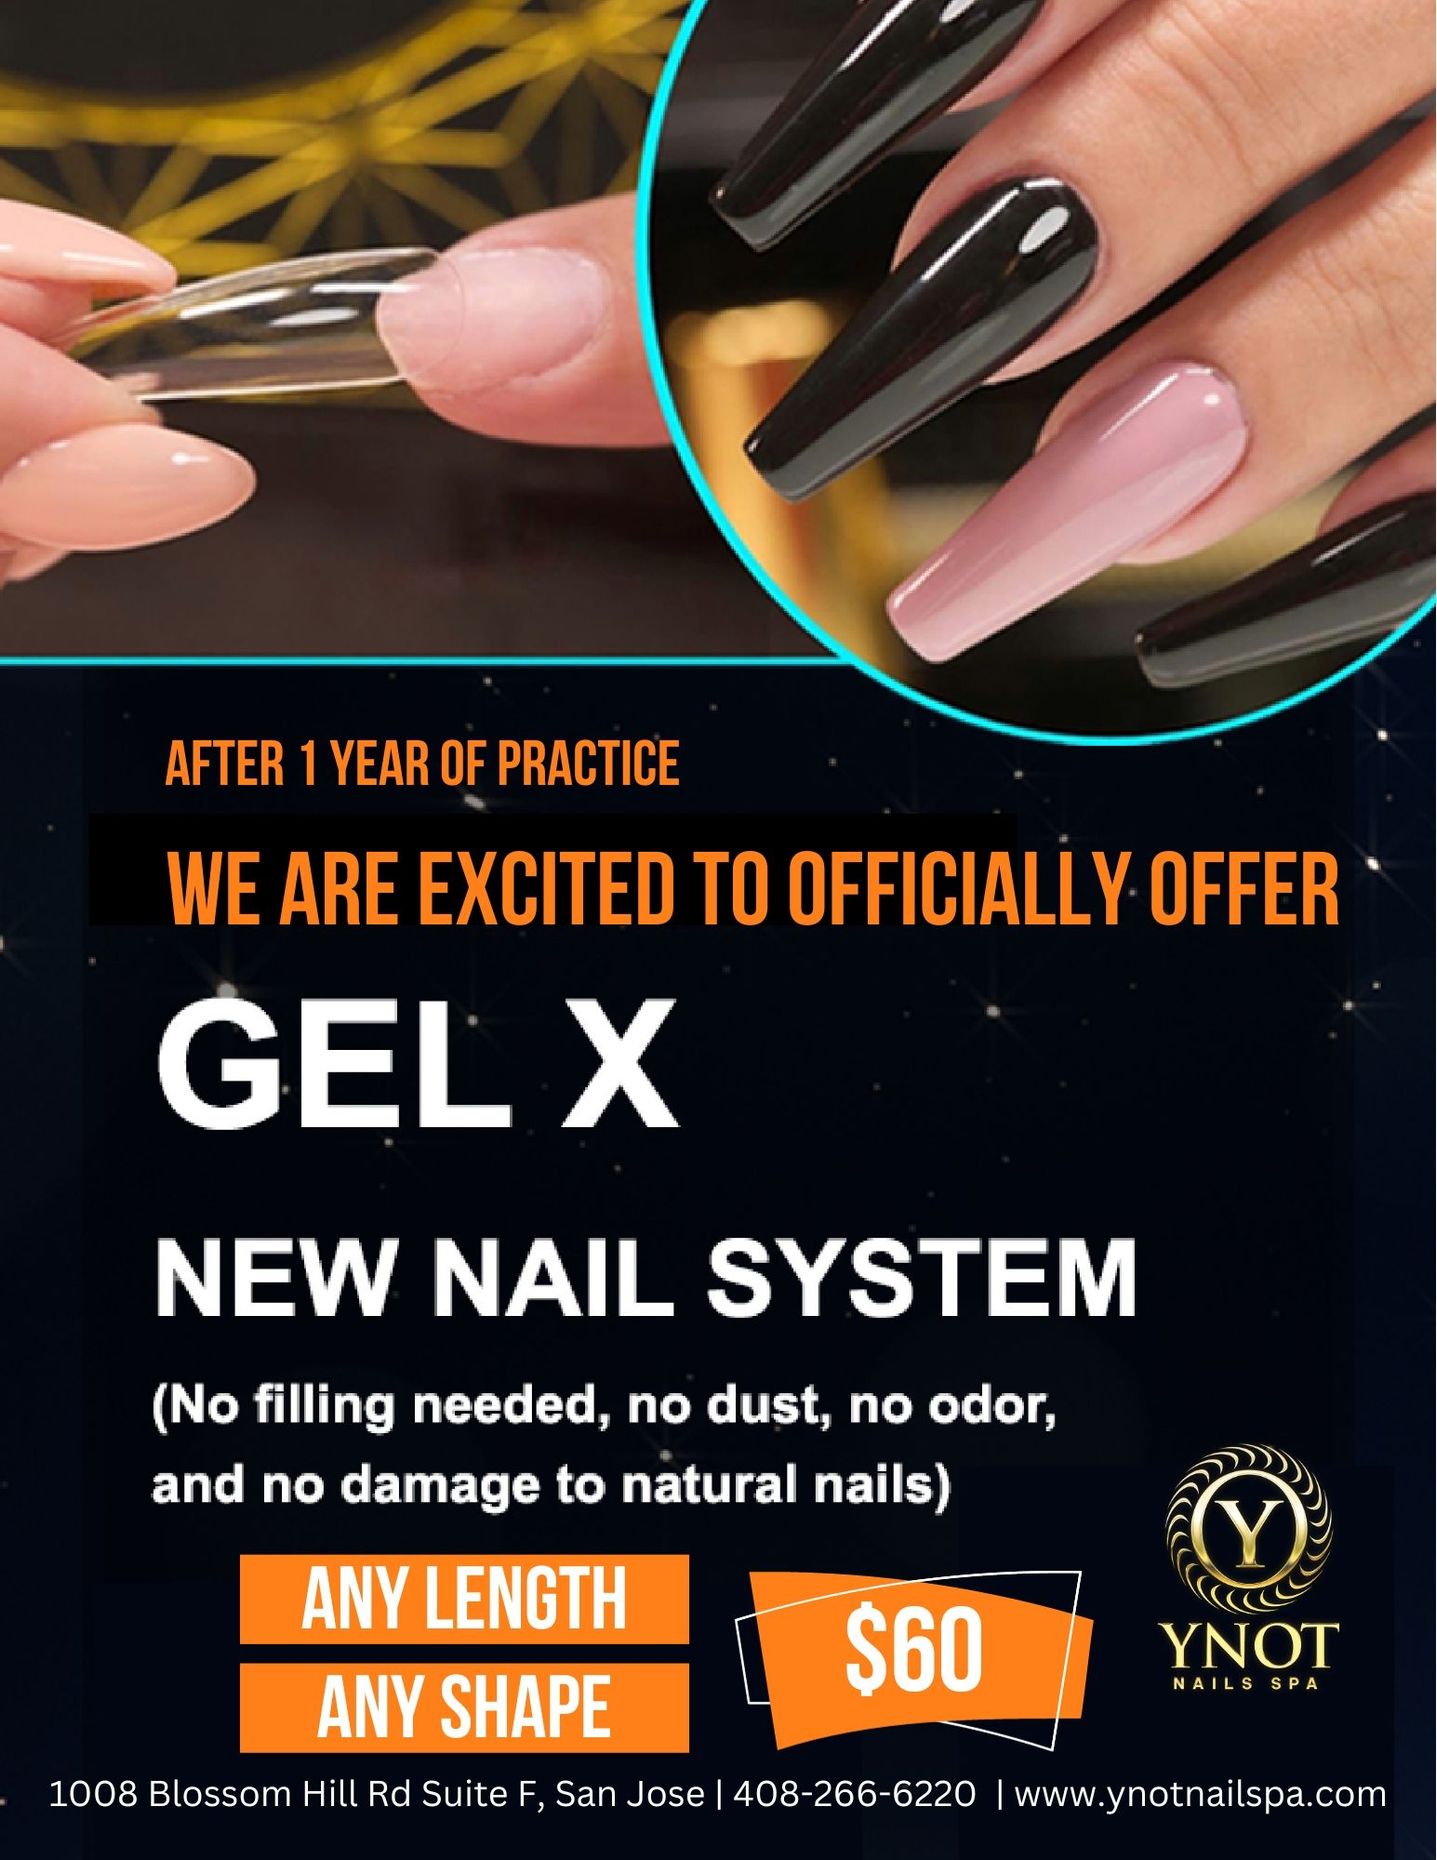 Shimmering Gel X Nails: Explore our exquisite collection of Gel X nail services for a lasting and glamorous manicure. Choose from a spectrum of colors and styles to enhance your beauty